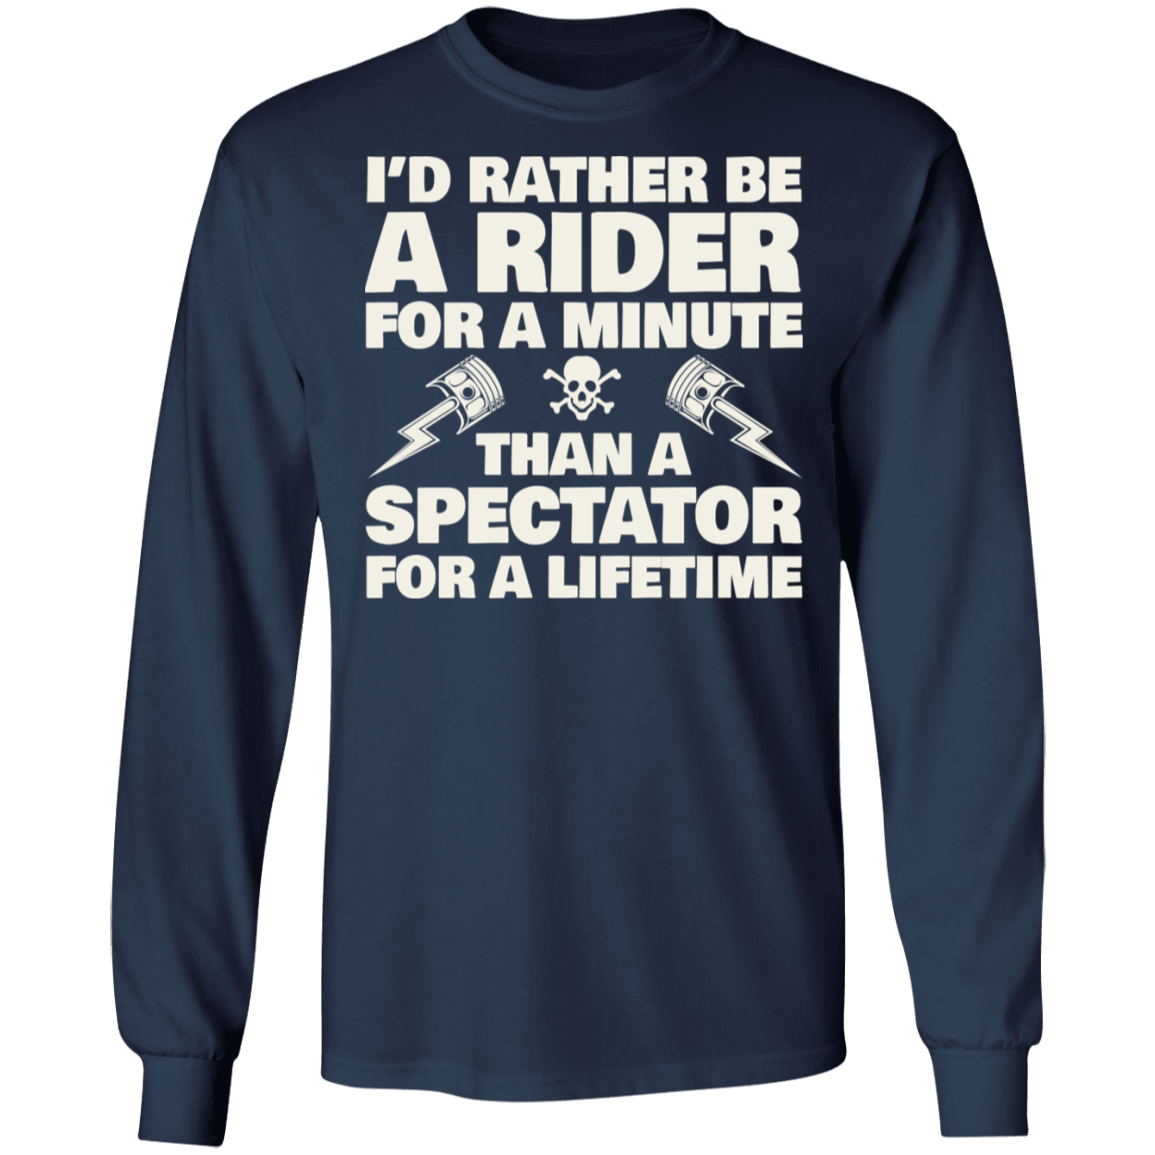 I’d rather be a rider for a minute, than a spectator for a lifetime Biker Shirt